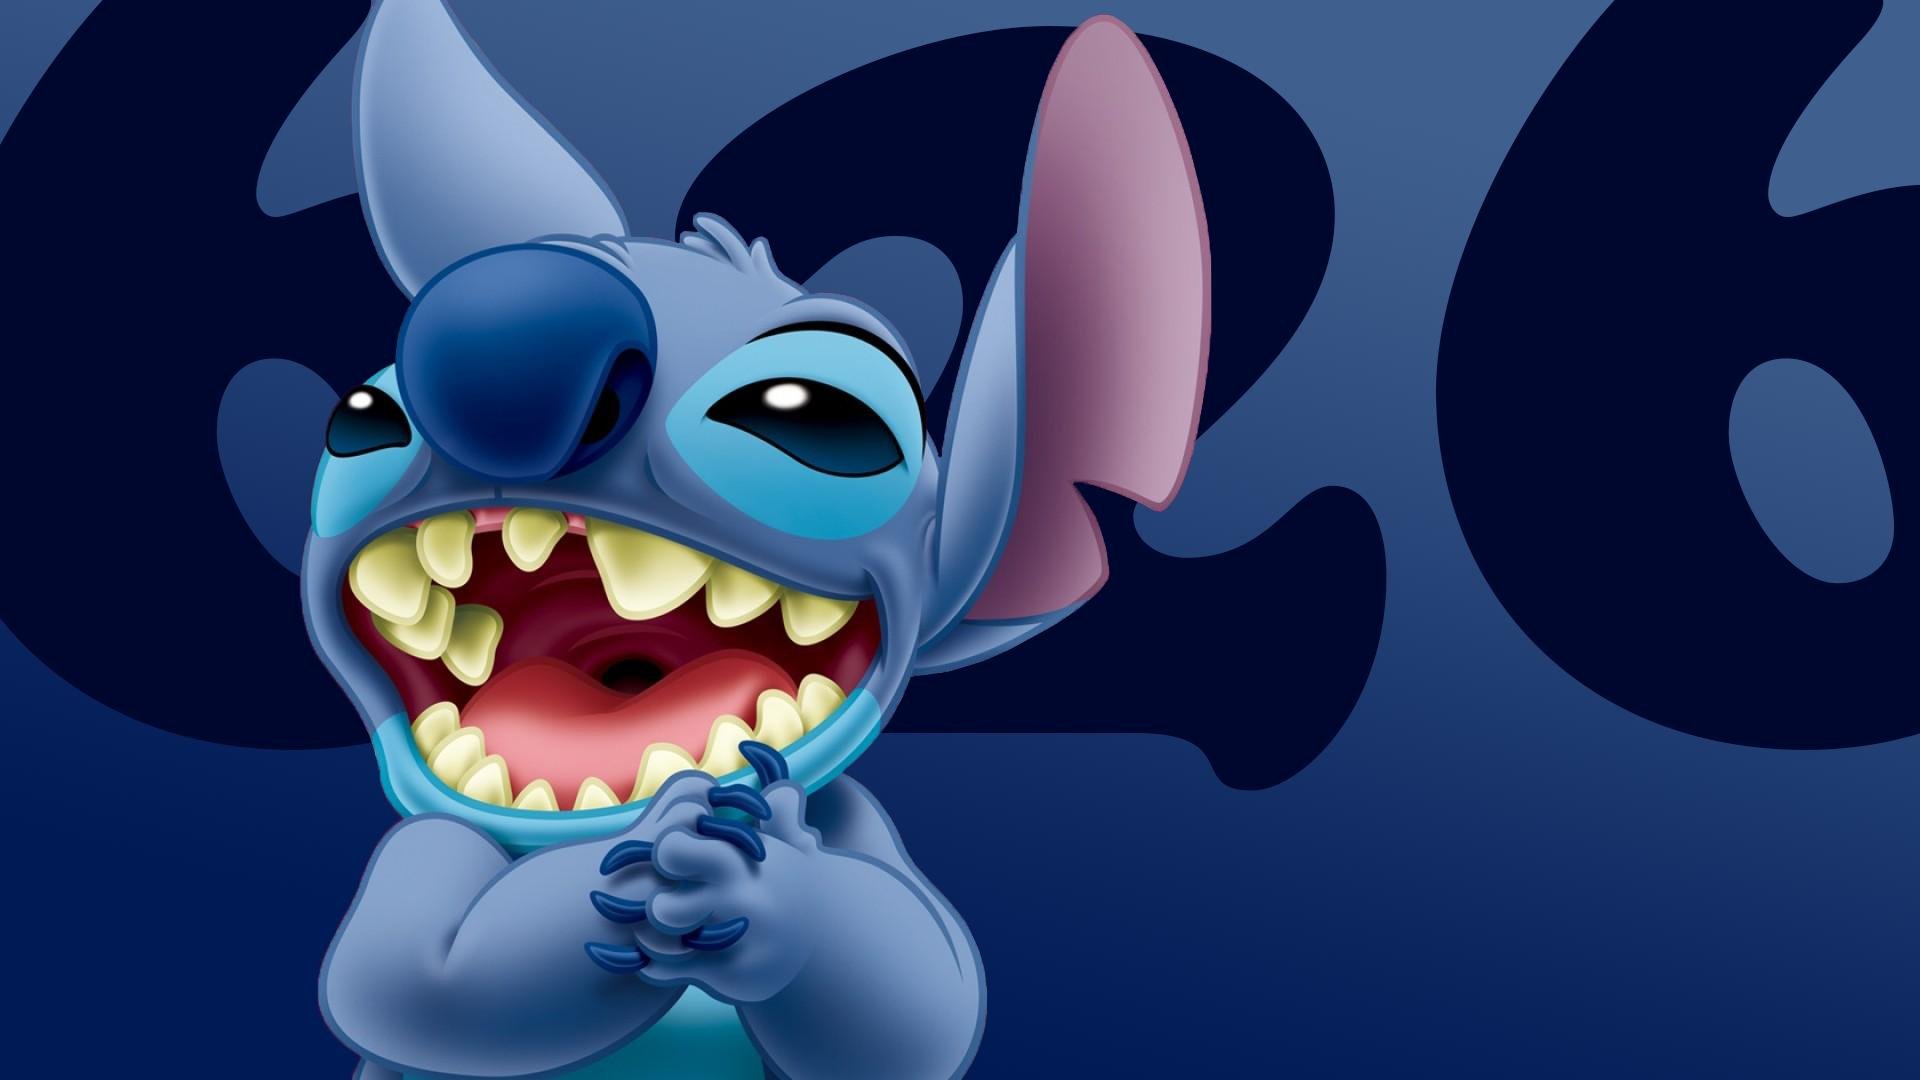 Stitch Lovers - Stitch wallpaper for your mobile phone. | Facebook